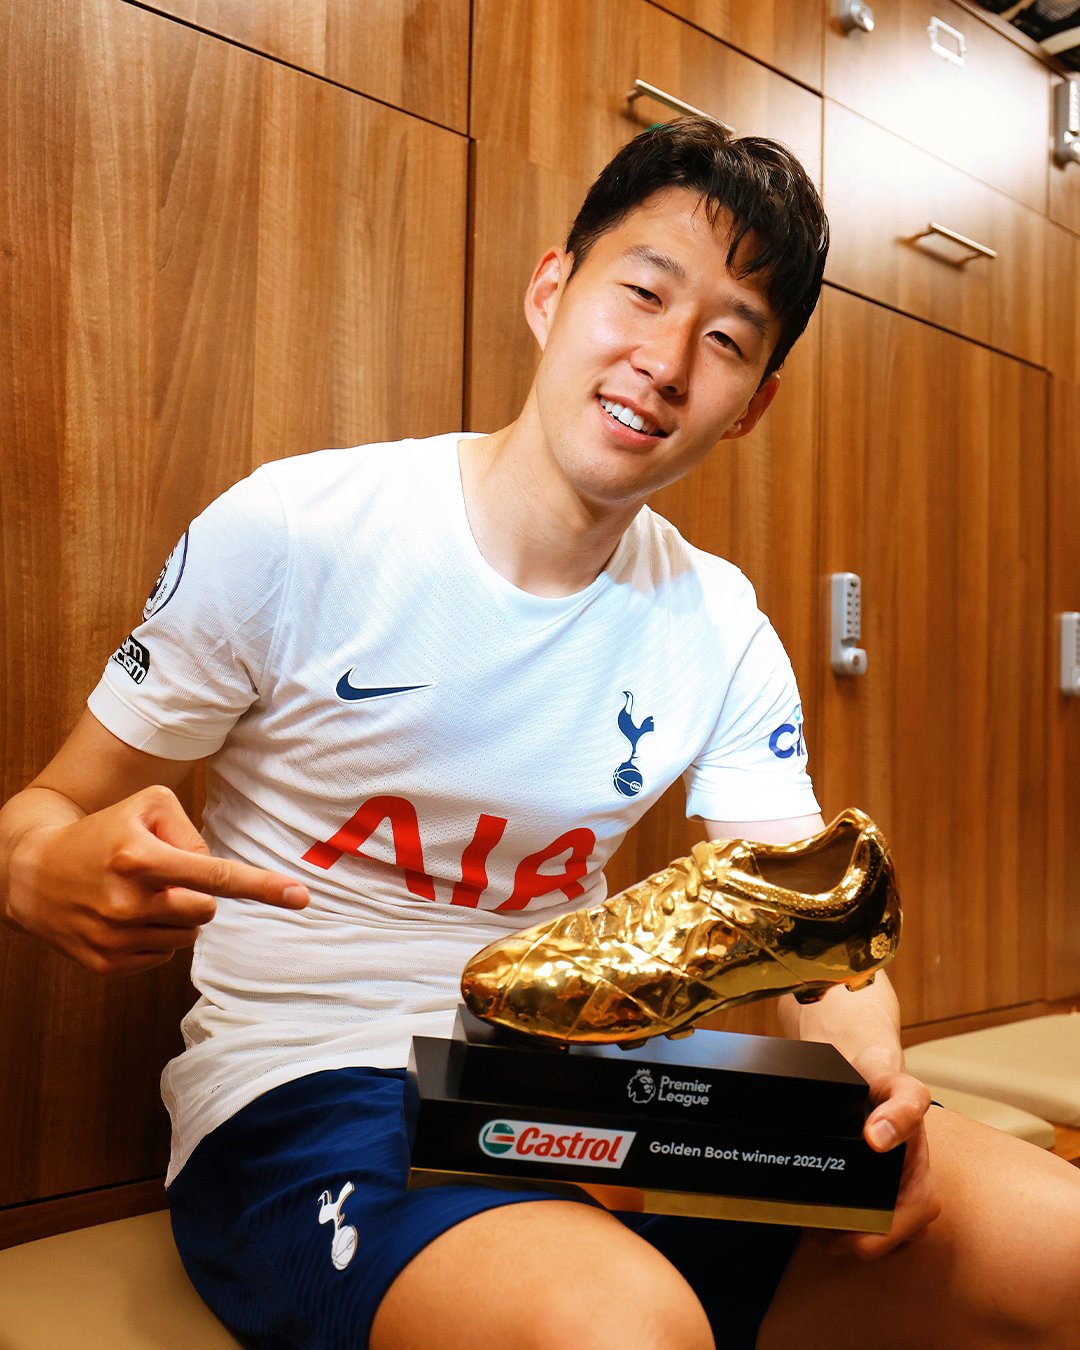 Premier League 2021/22: Tottenham's Son Heung-min becomes first Asian to win Premier League's Golden Boot, shares award with Mohamed Salah